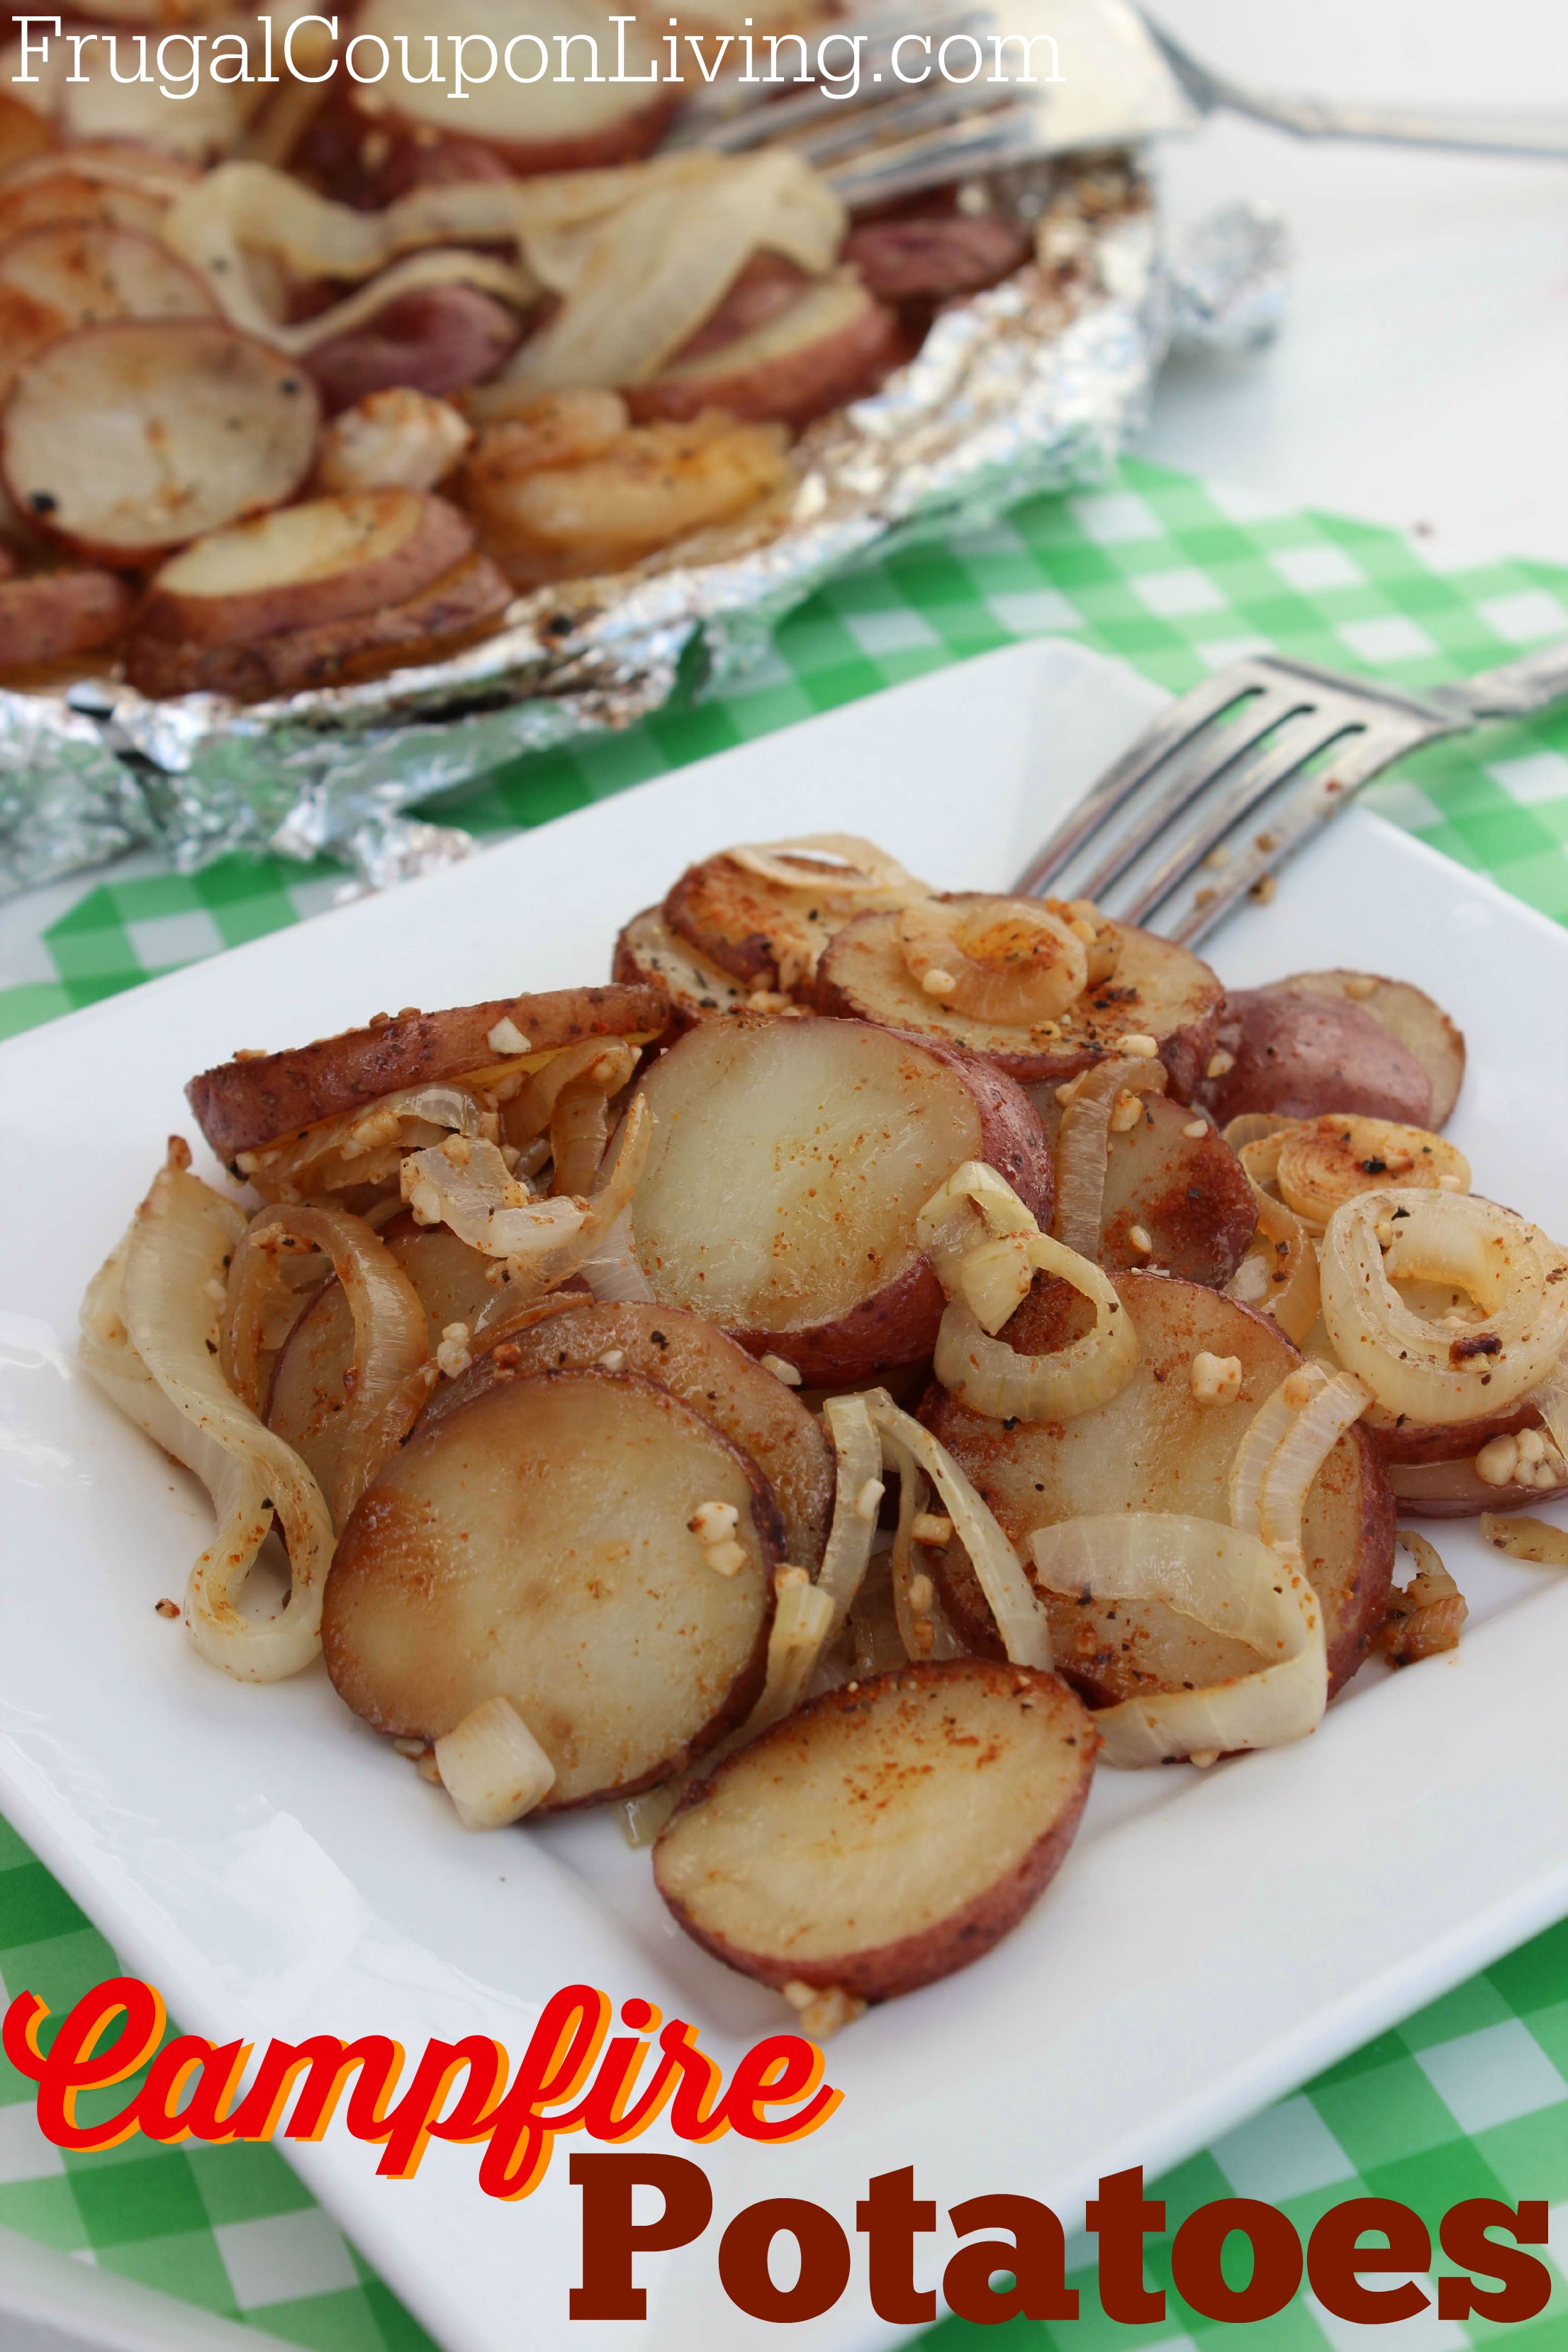 campfire-potatoes-frugal-coupon-living